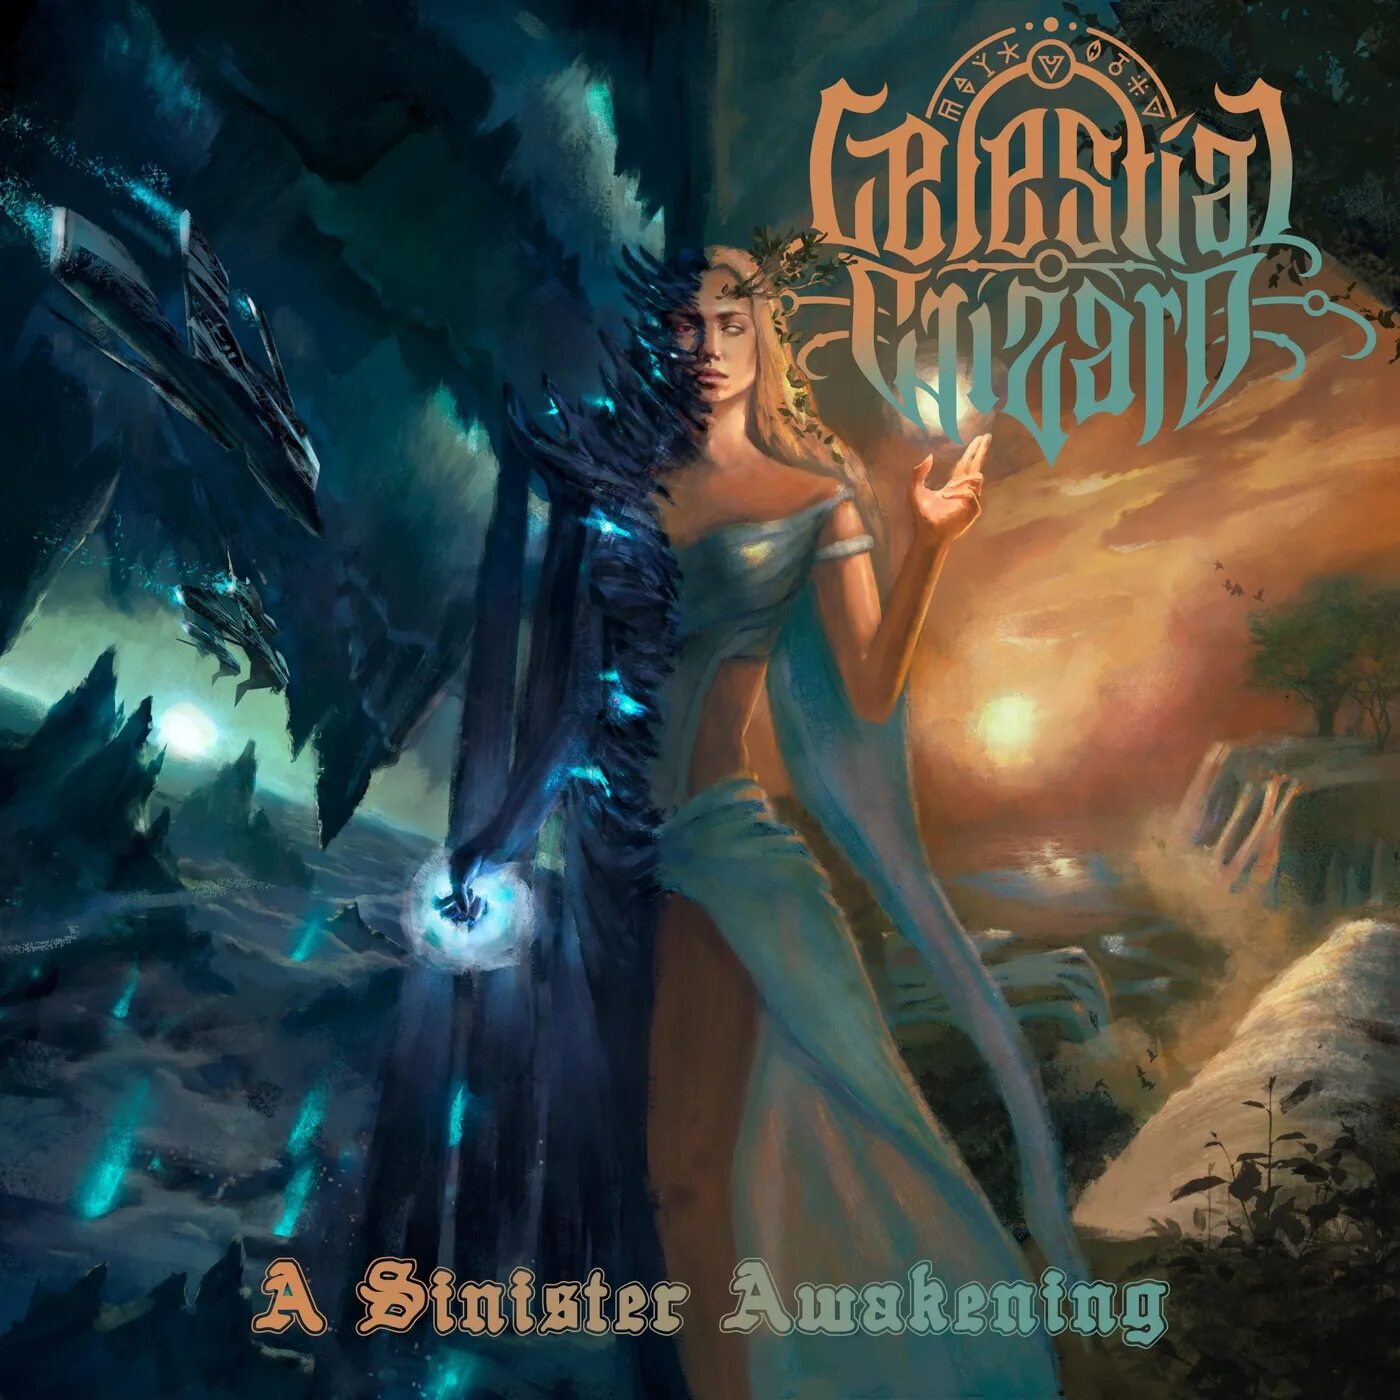 Might journey. A Sinister Awakening (2018). Celestial Wizard 2018 'a Sinister Awakening'. Пробуждение целестиала. 7 Witchcraft альбом.